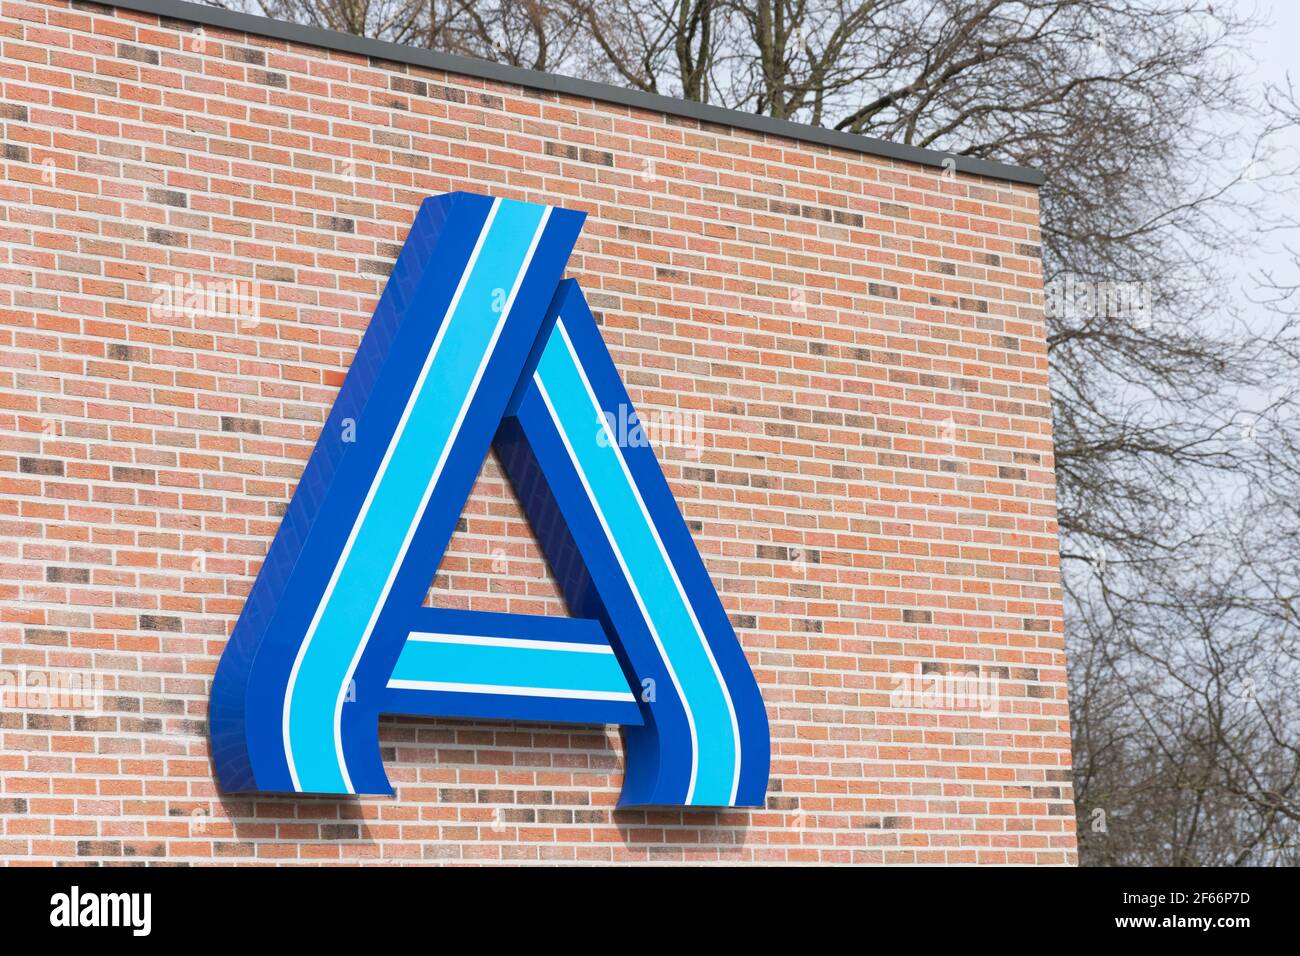 Sint Gillis Waas, Belgium, March 28, 2021, Logo of the supermarket chain Aldi on a stone wall Stock Photo